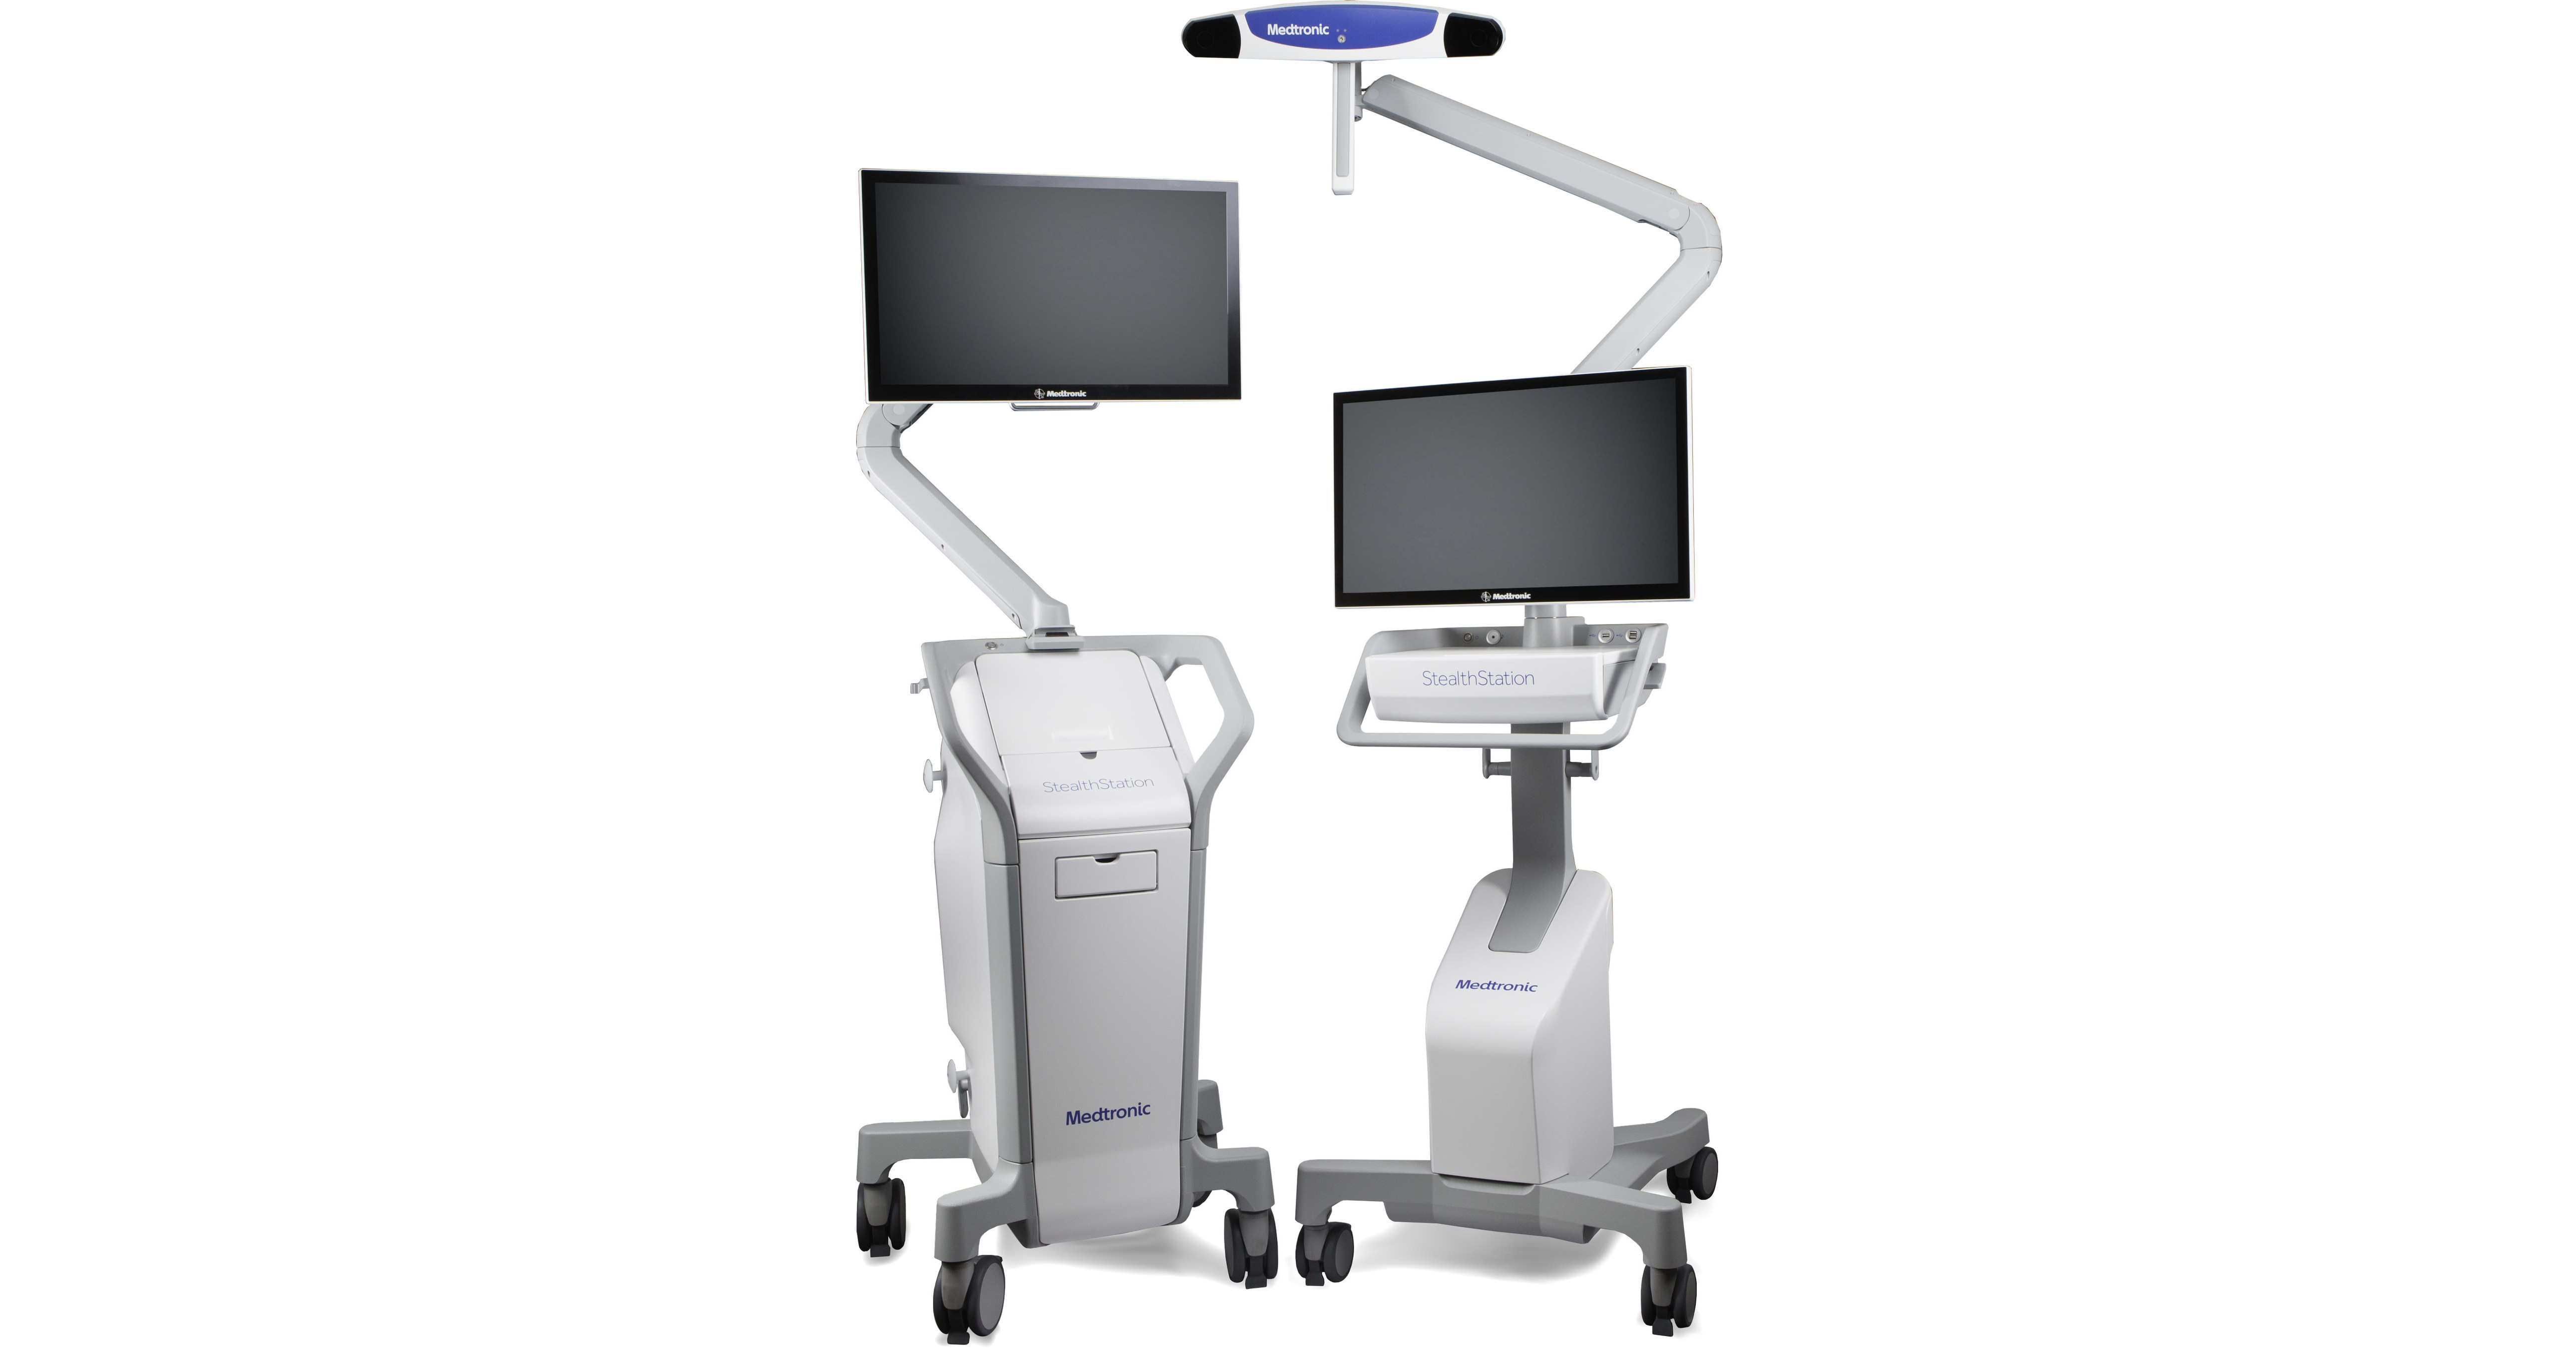 medtronic canada neurosurgery spinal stealthstation launches